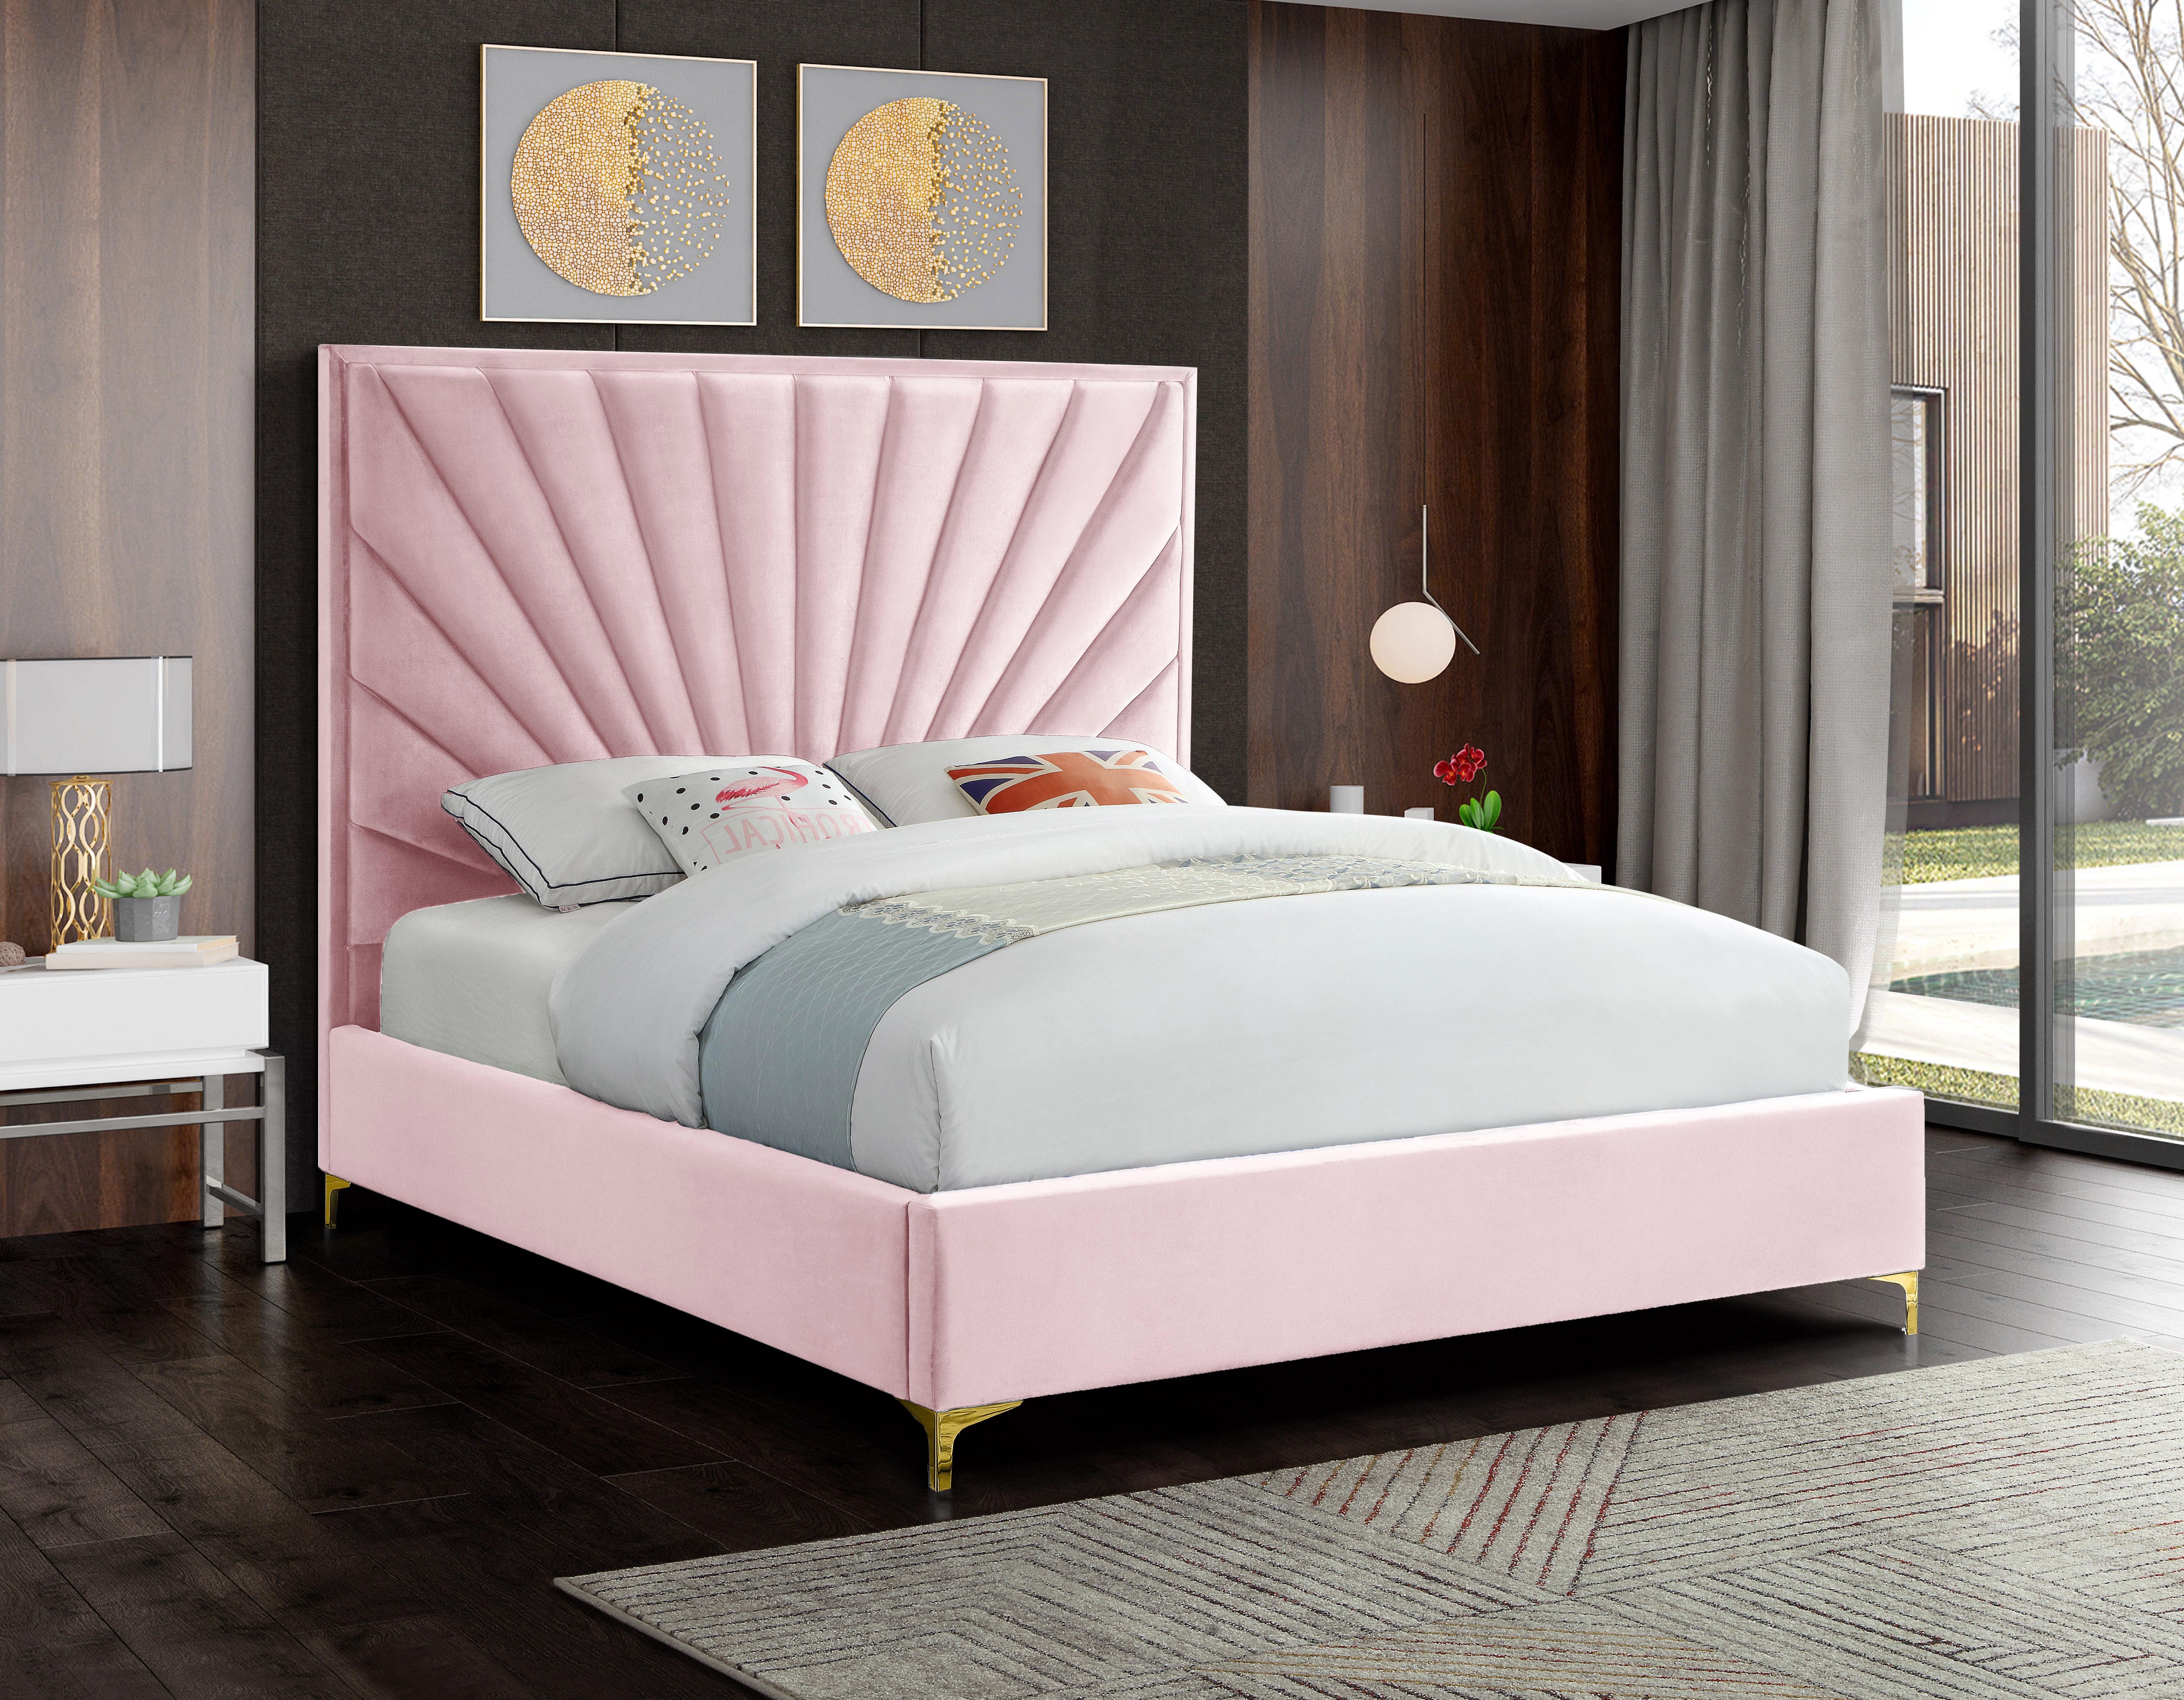 

    
Luxurious Pink Velvet Tufted Queen Bed ECLIPSE Meridian Contemporary Modern
